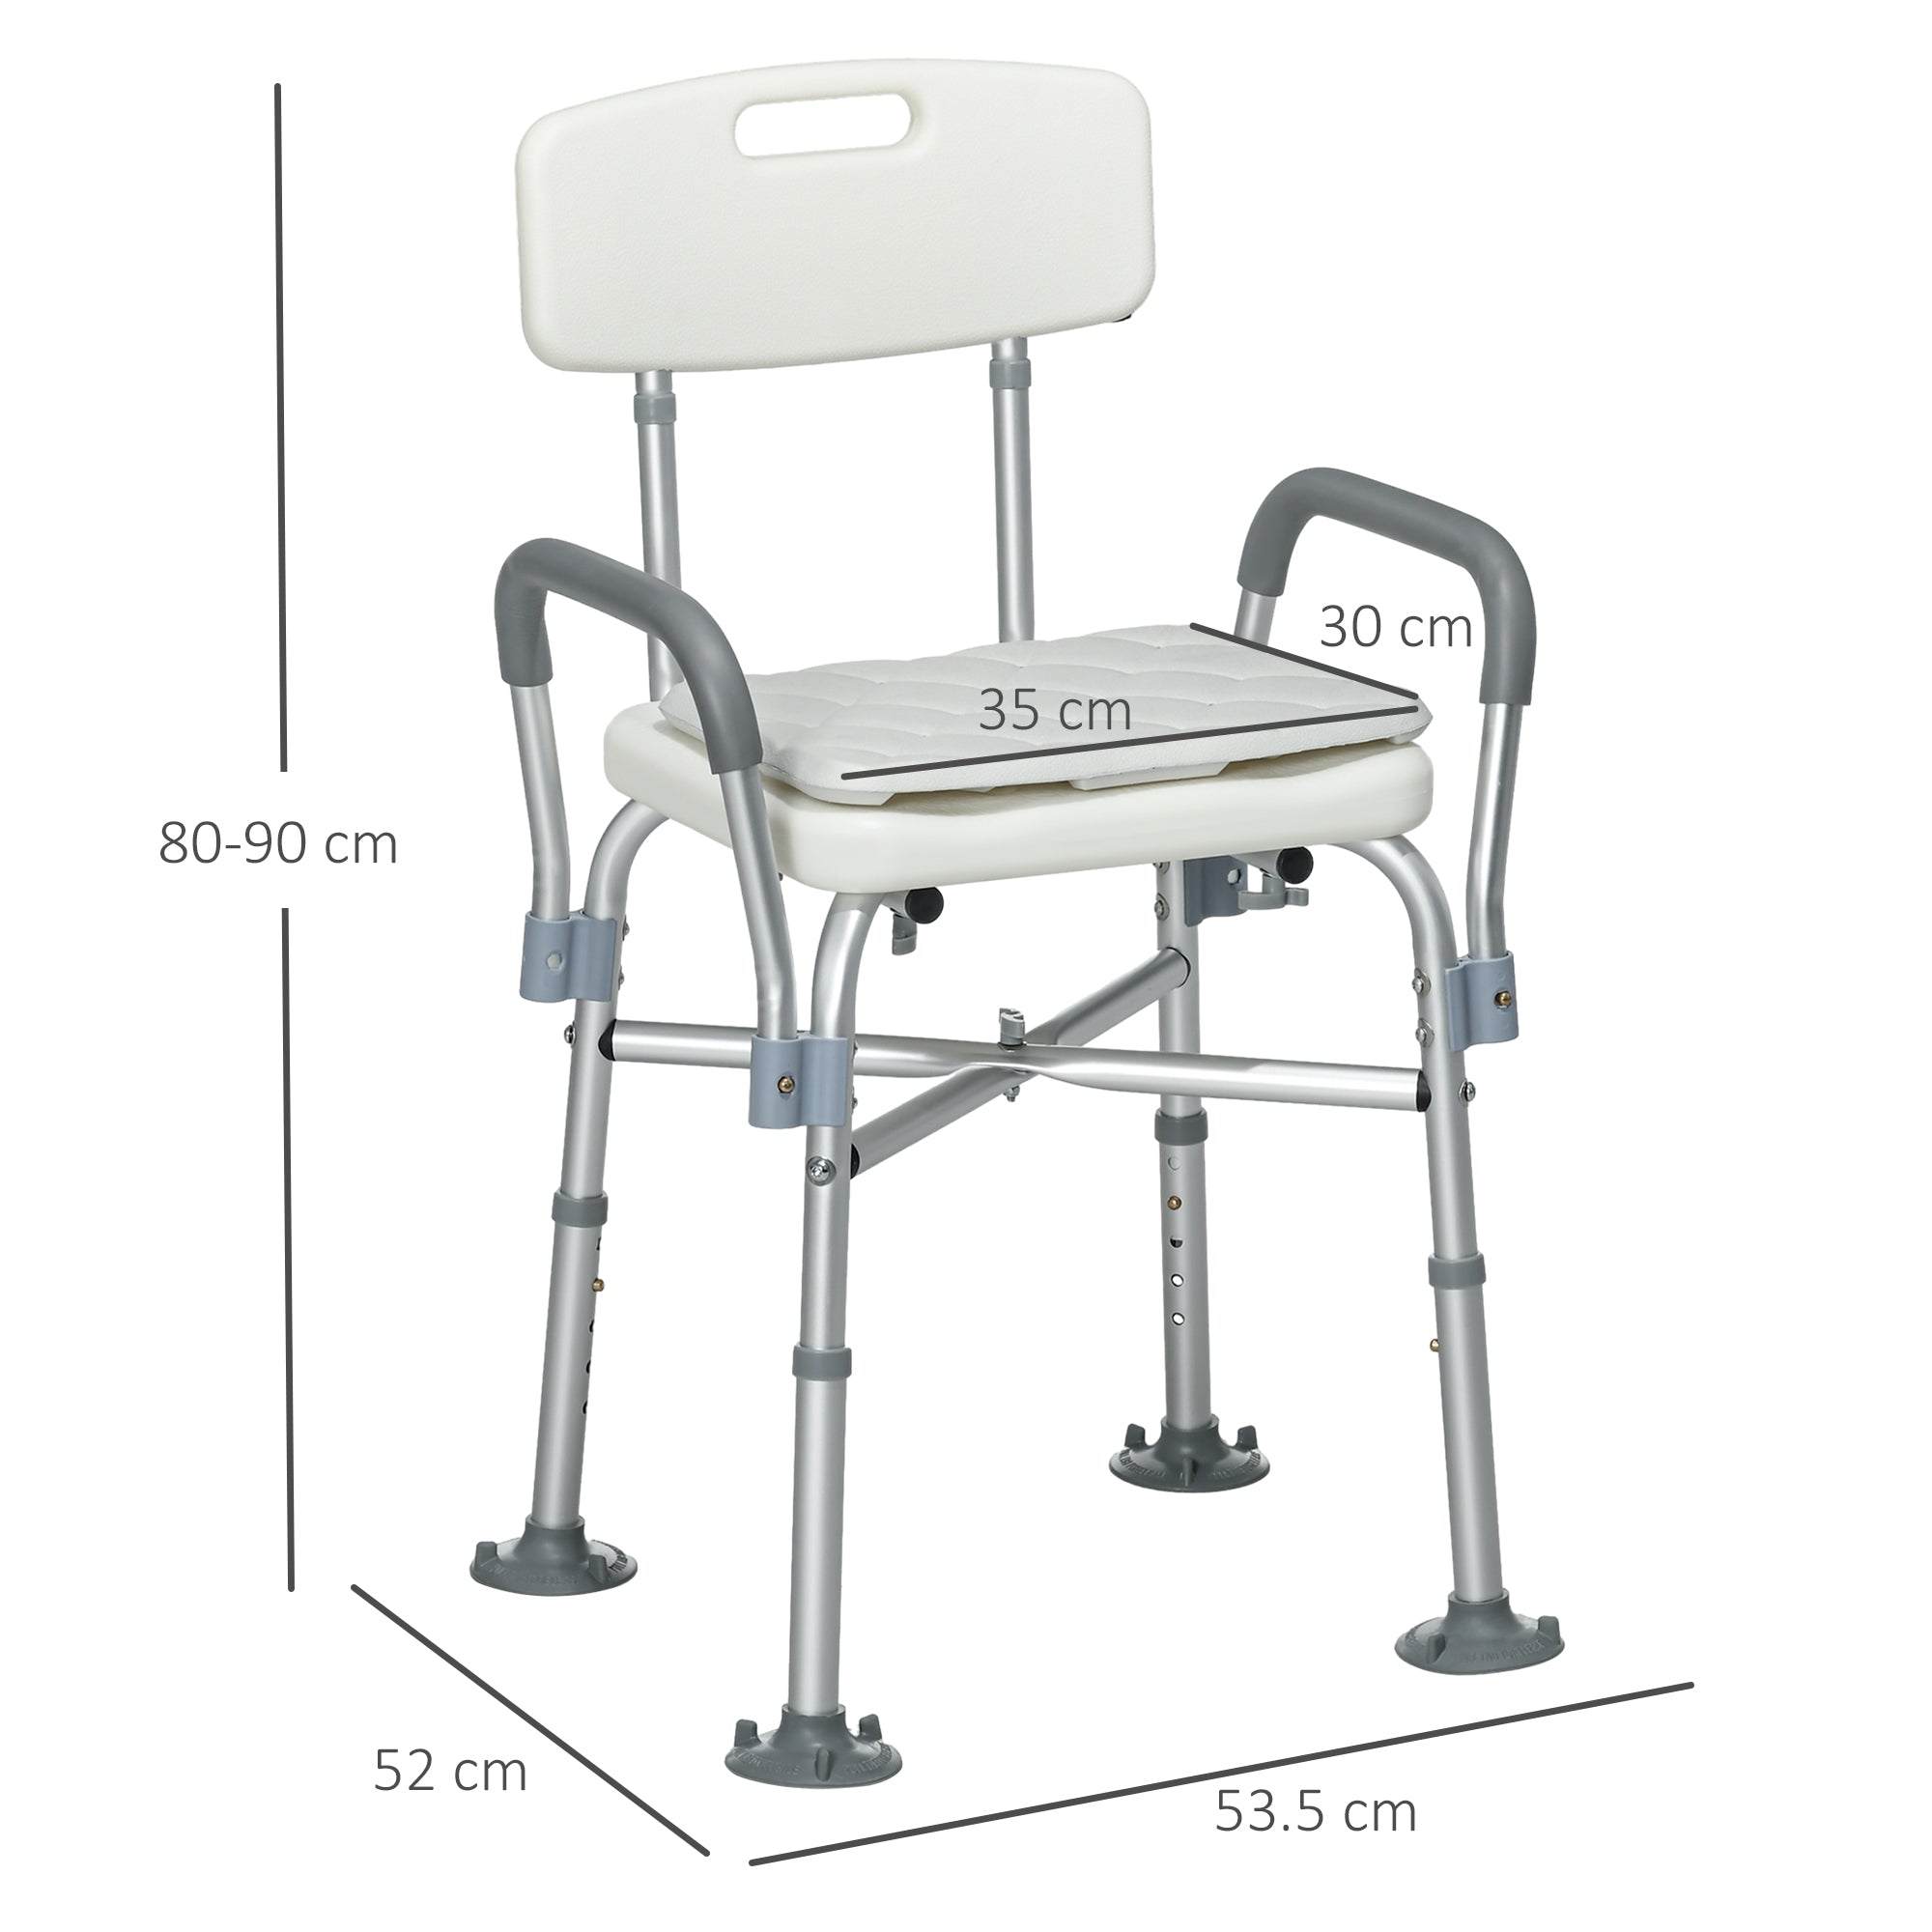 HOMCOM Aluminium Shower Chair with Backs and Arms, Height Adjustable Shower Seat with Removable Padded Cushion, Bath Stool for Seniors, Disabled, Pregnant, White